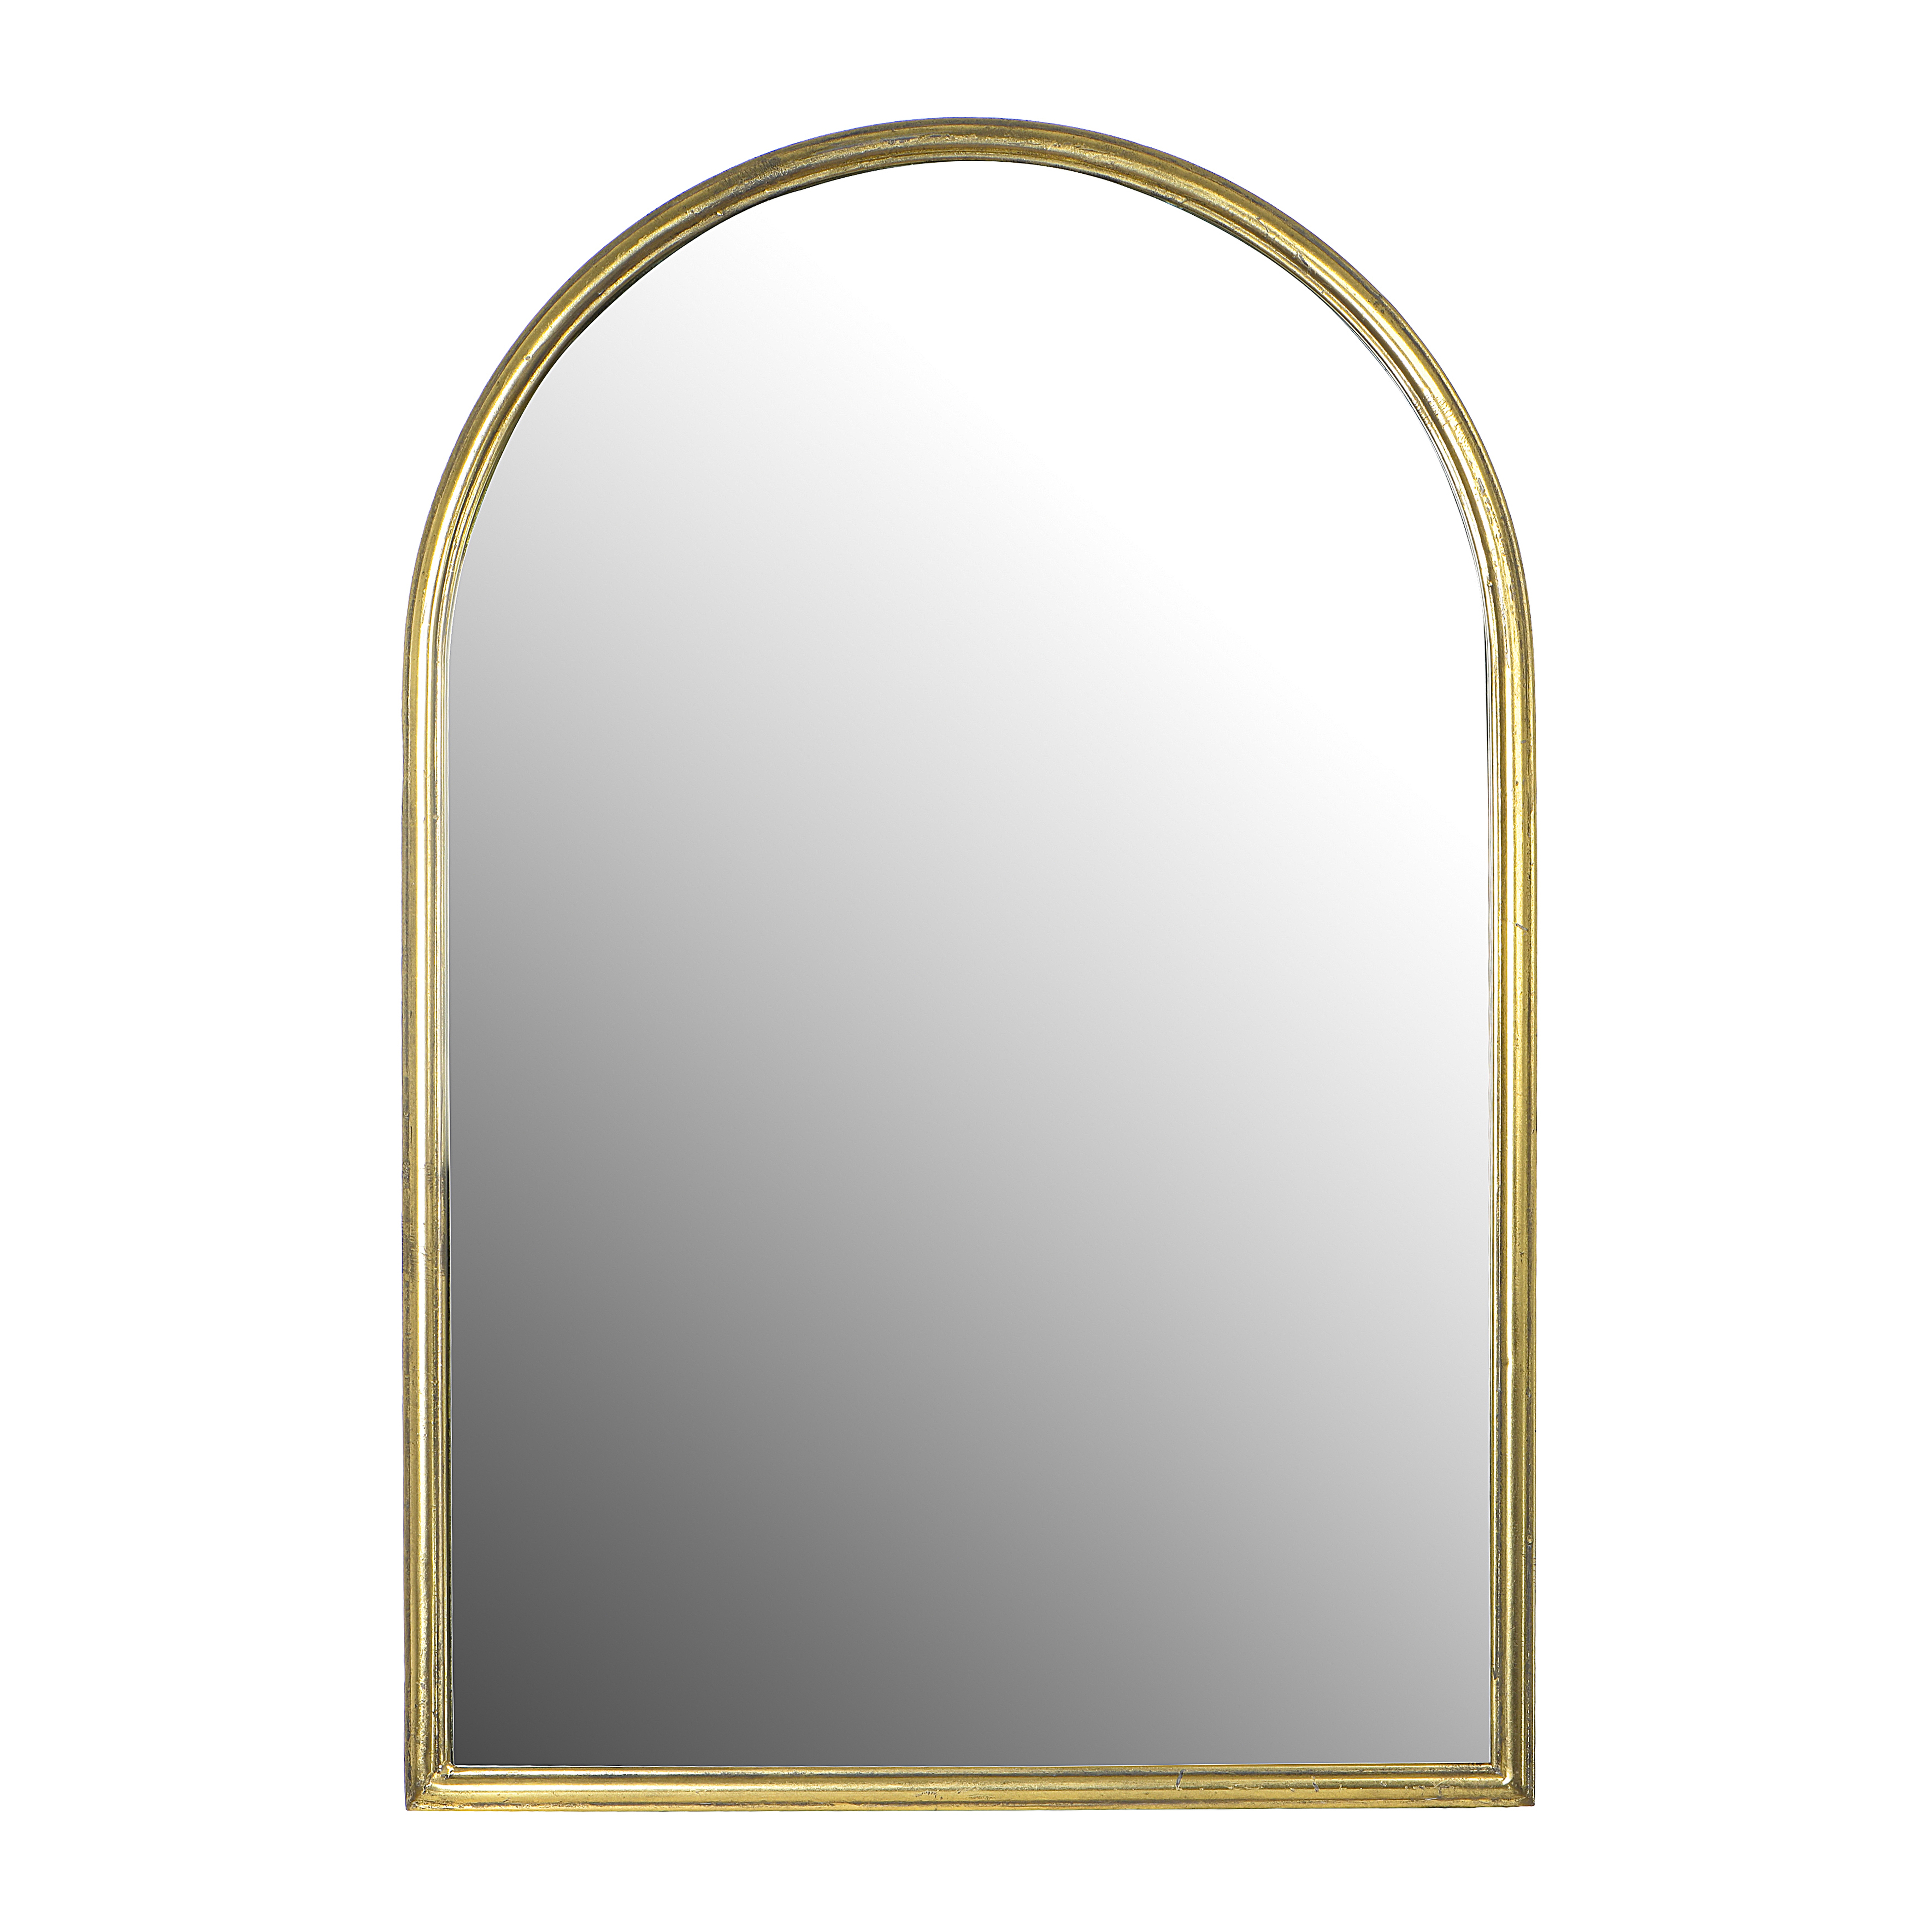 Arched Metal Wall Mirror, Gold - Nomad Home